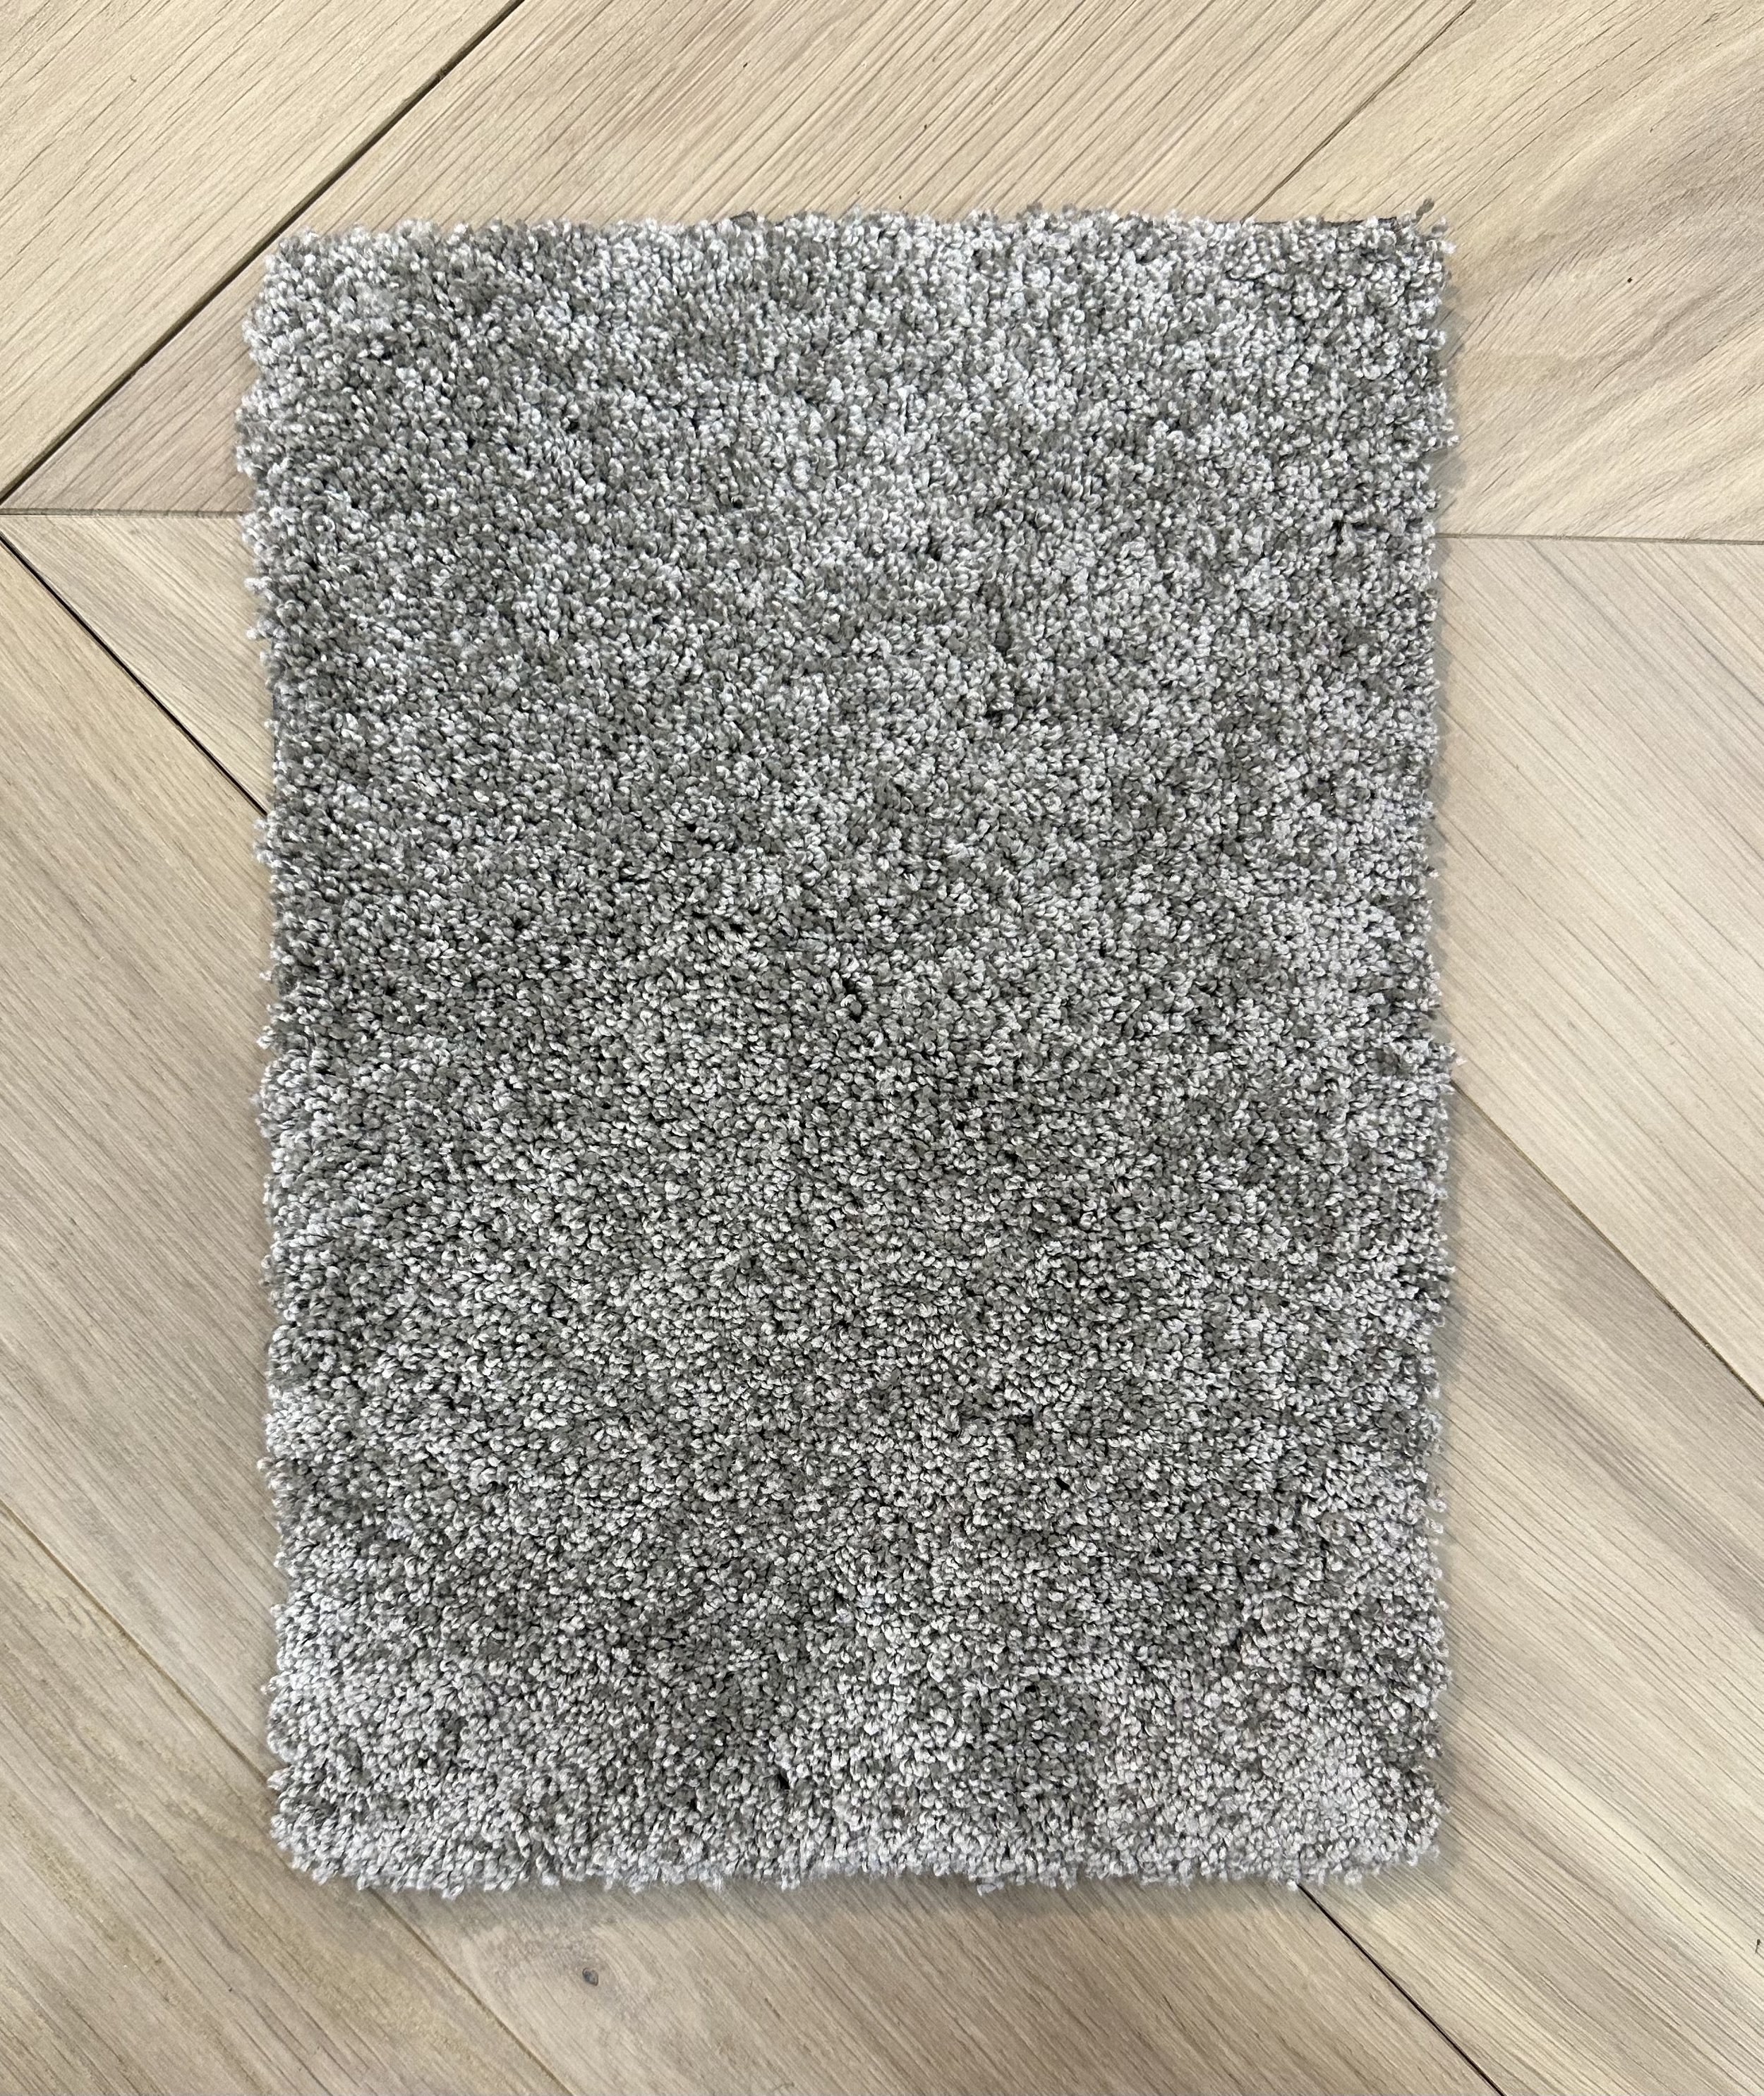 How to Use Carpet Remnants for Area Rugs